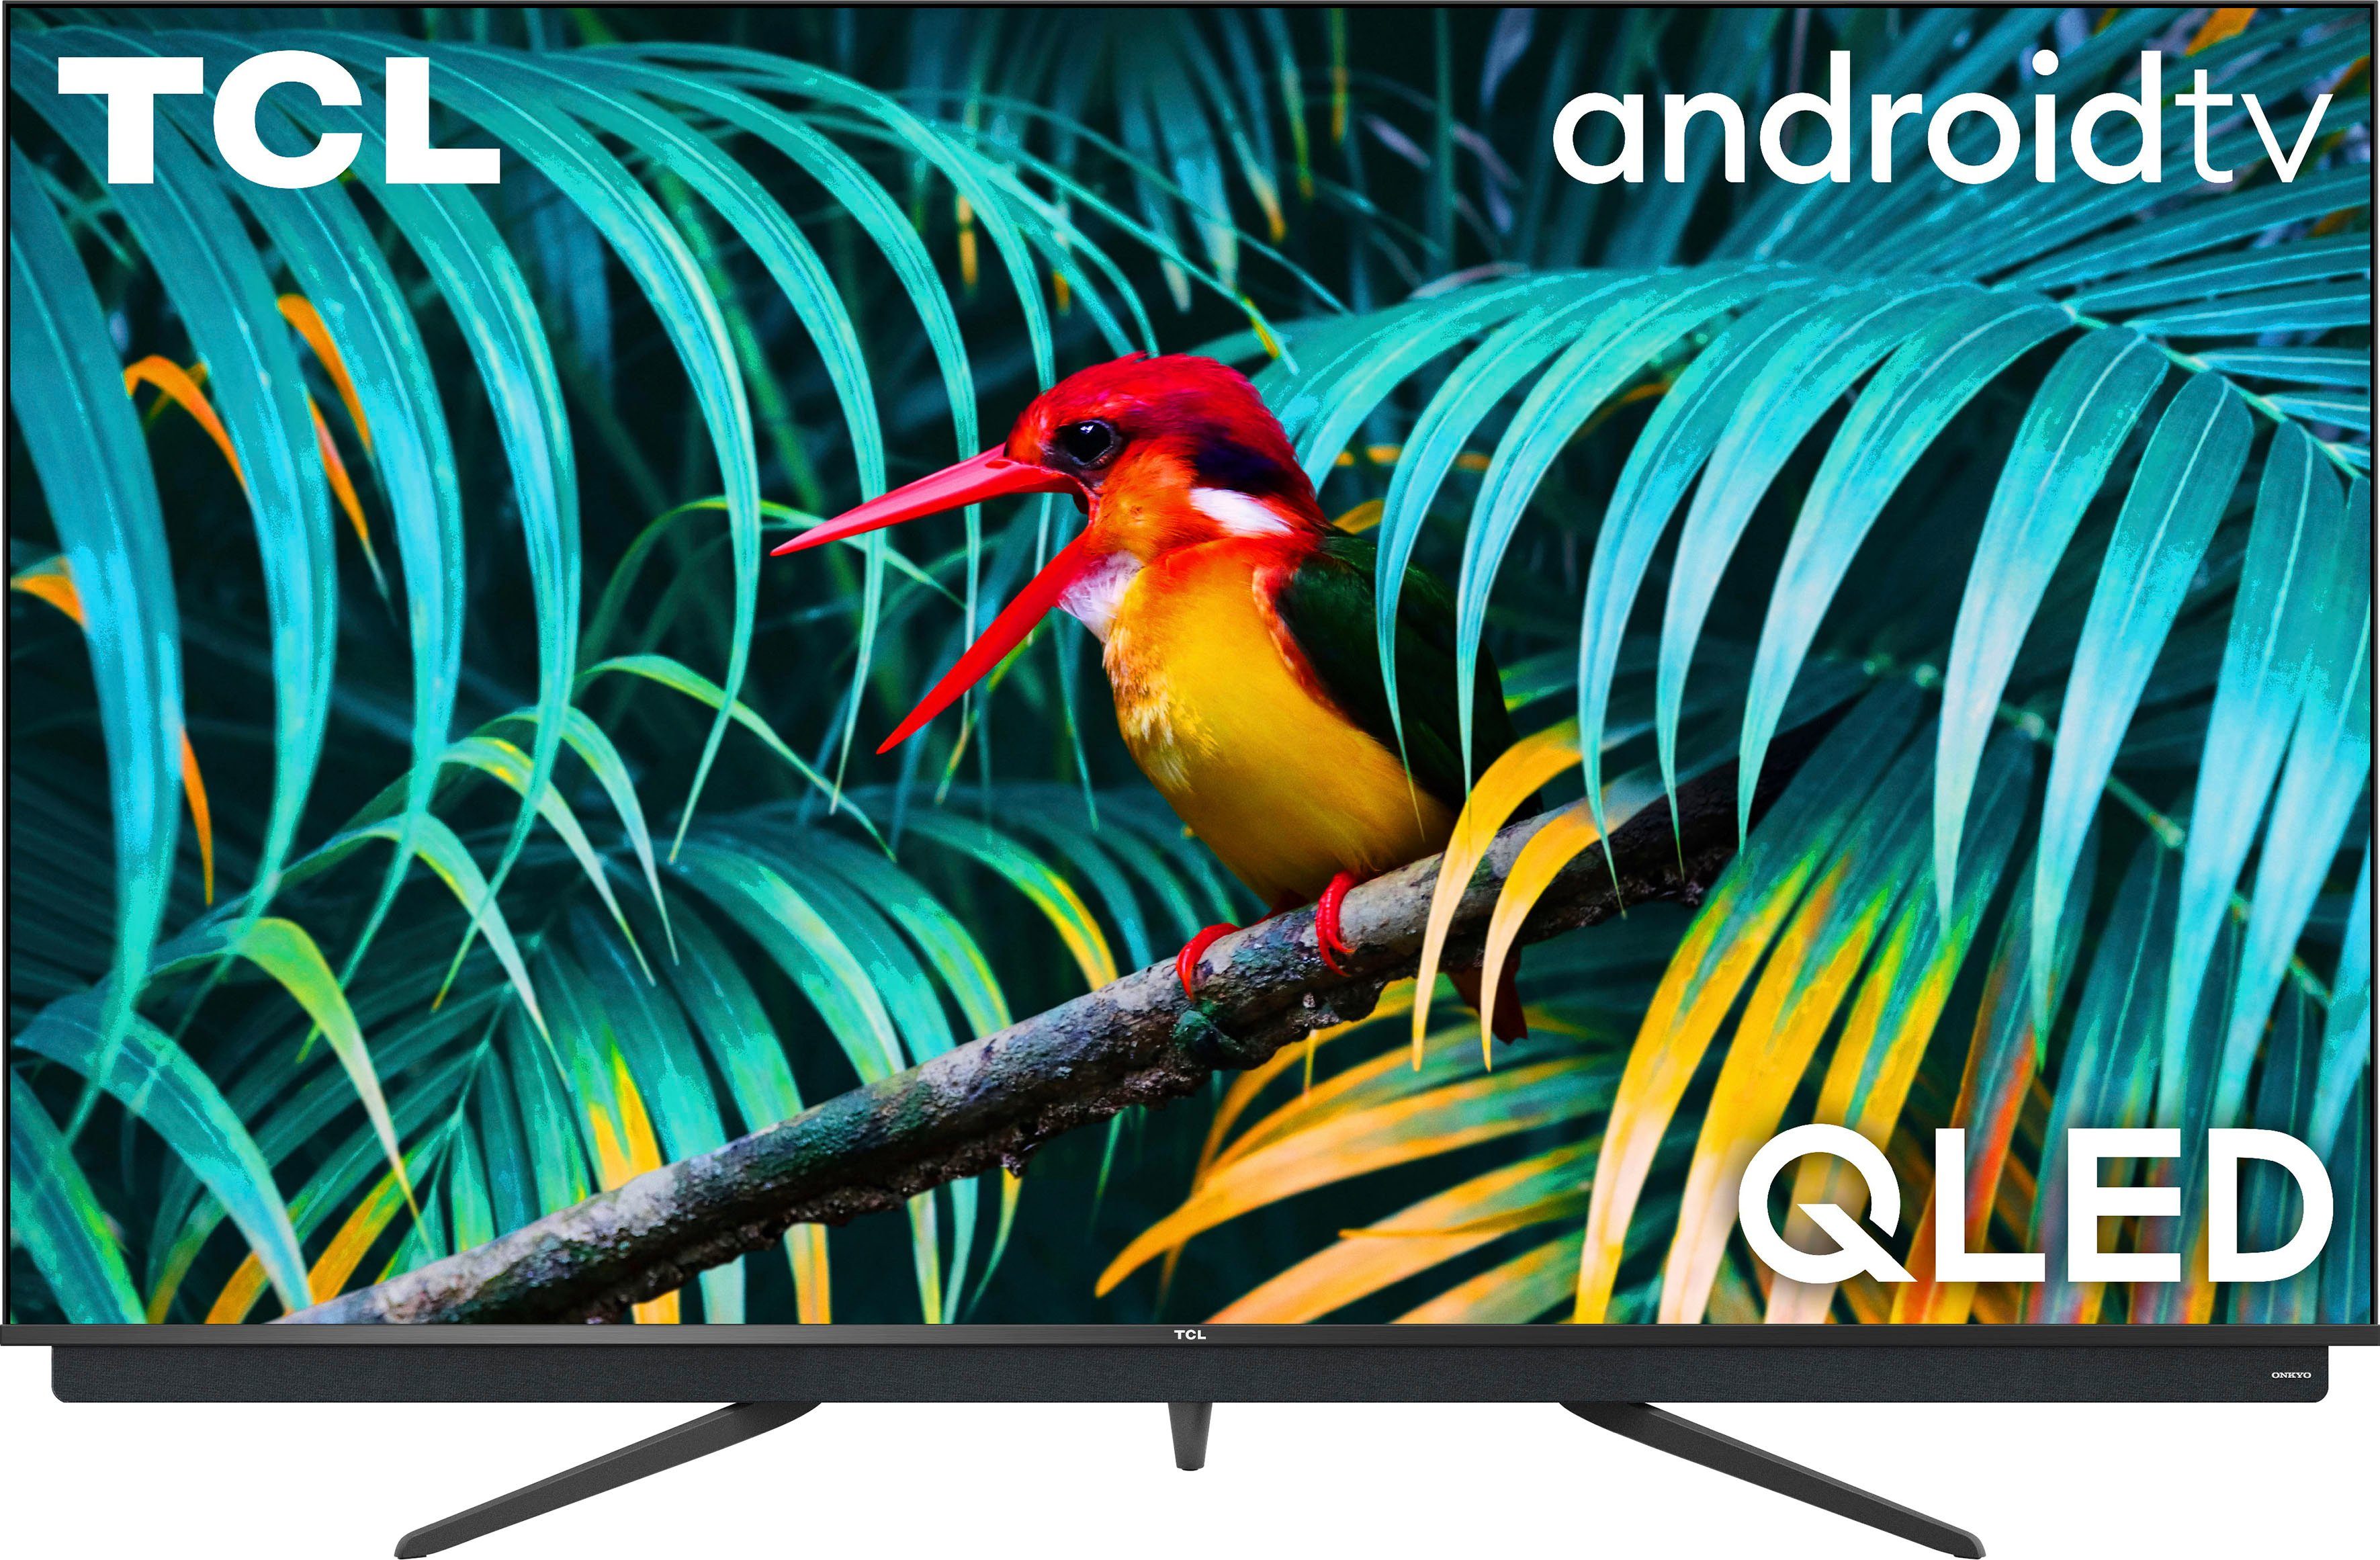 Tcl 55c815 Qled Fernseher 139 Cm 55 Zoll 4k Ultra Hd Android Tv Mit